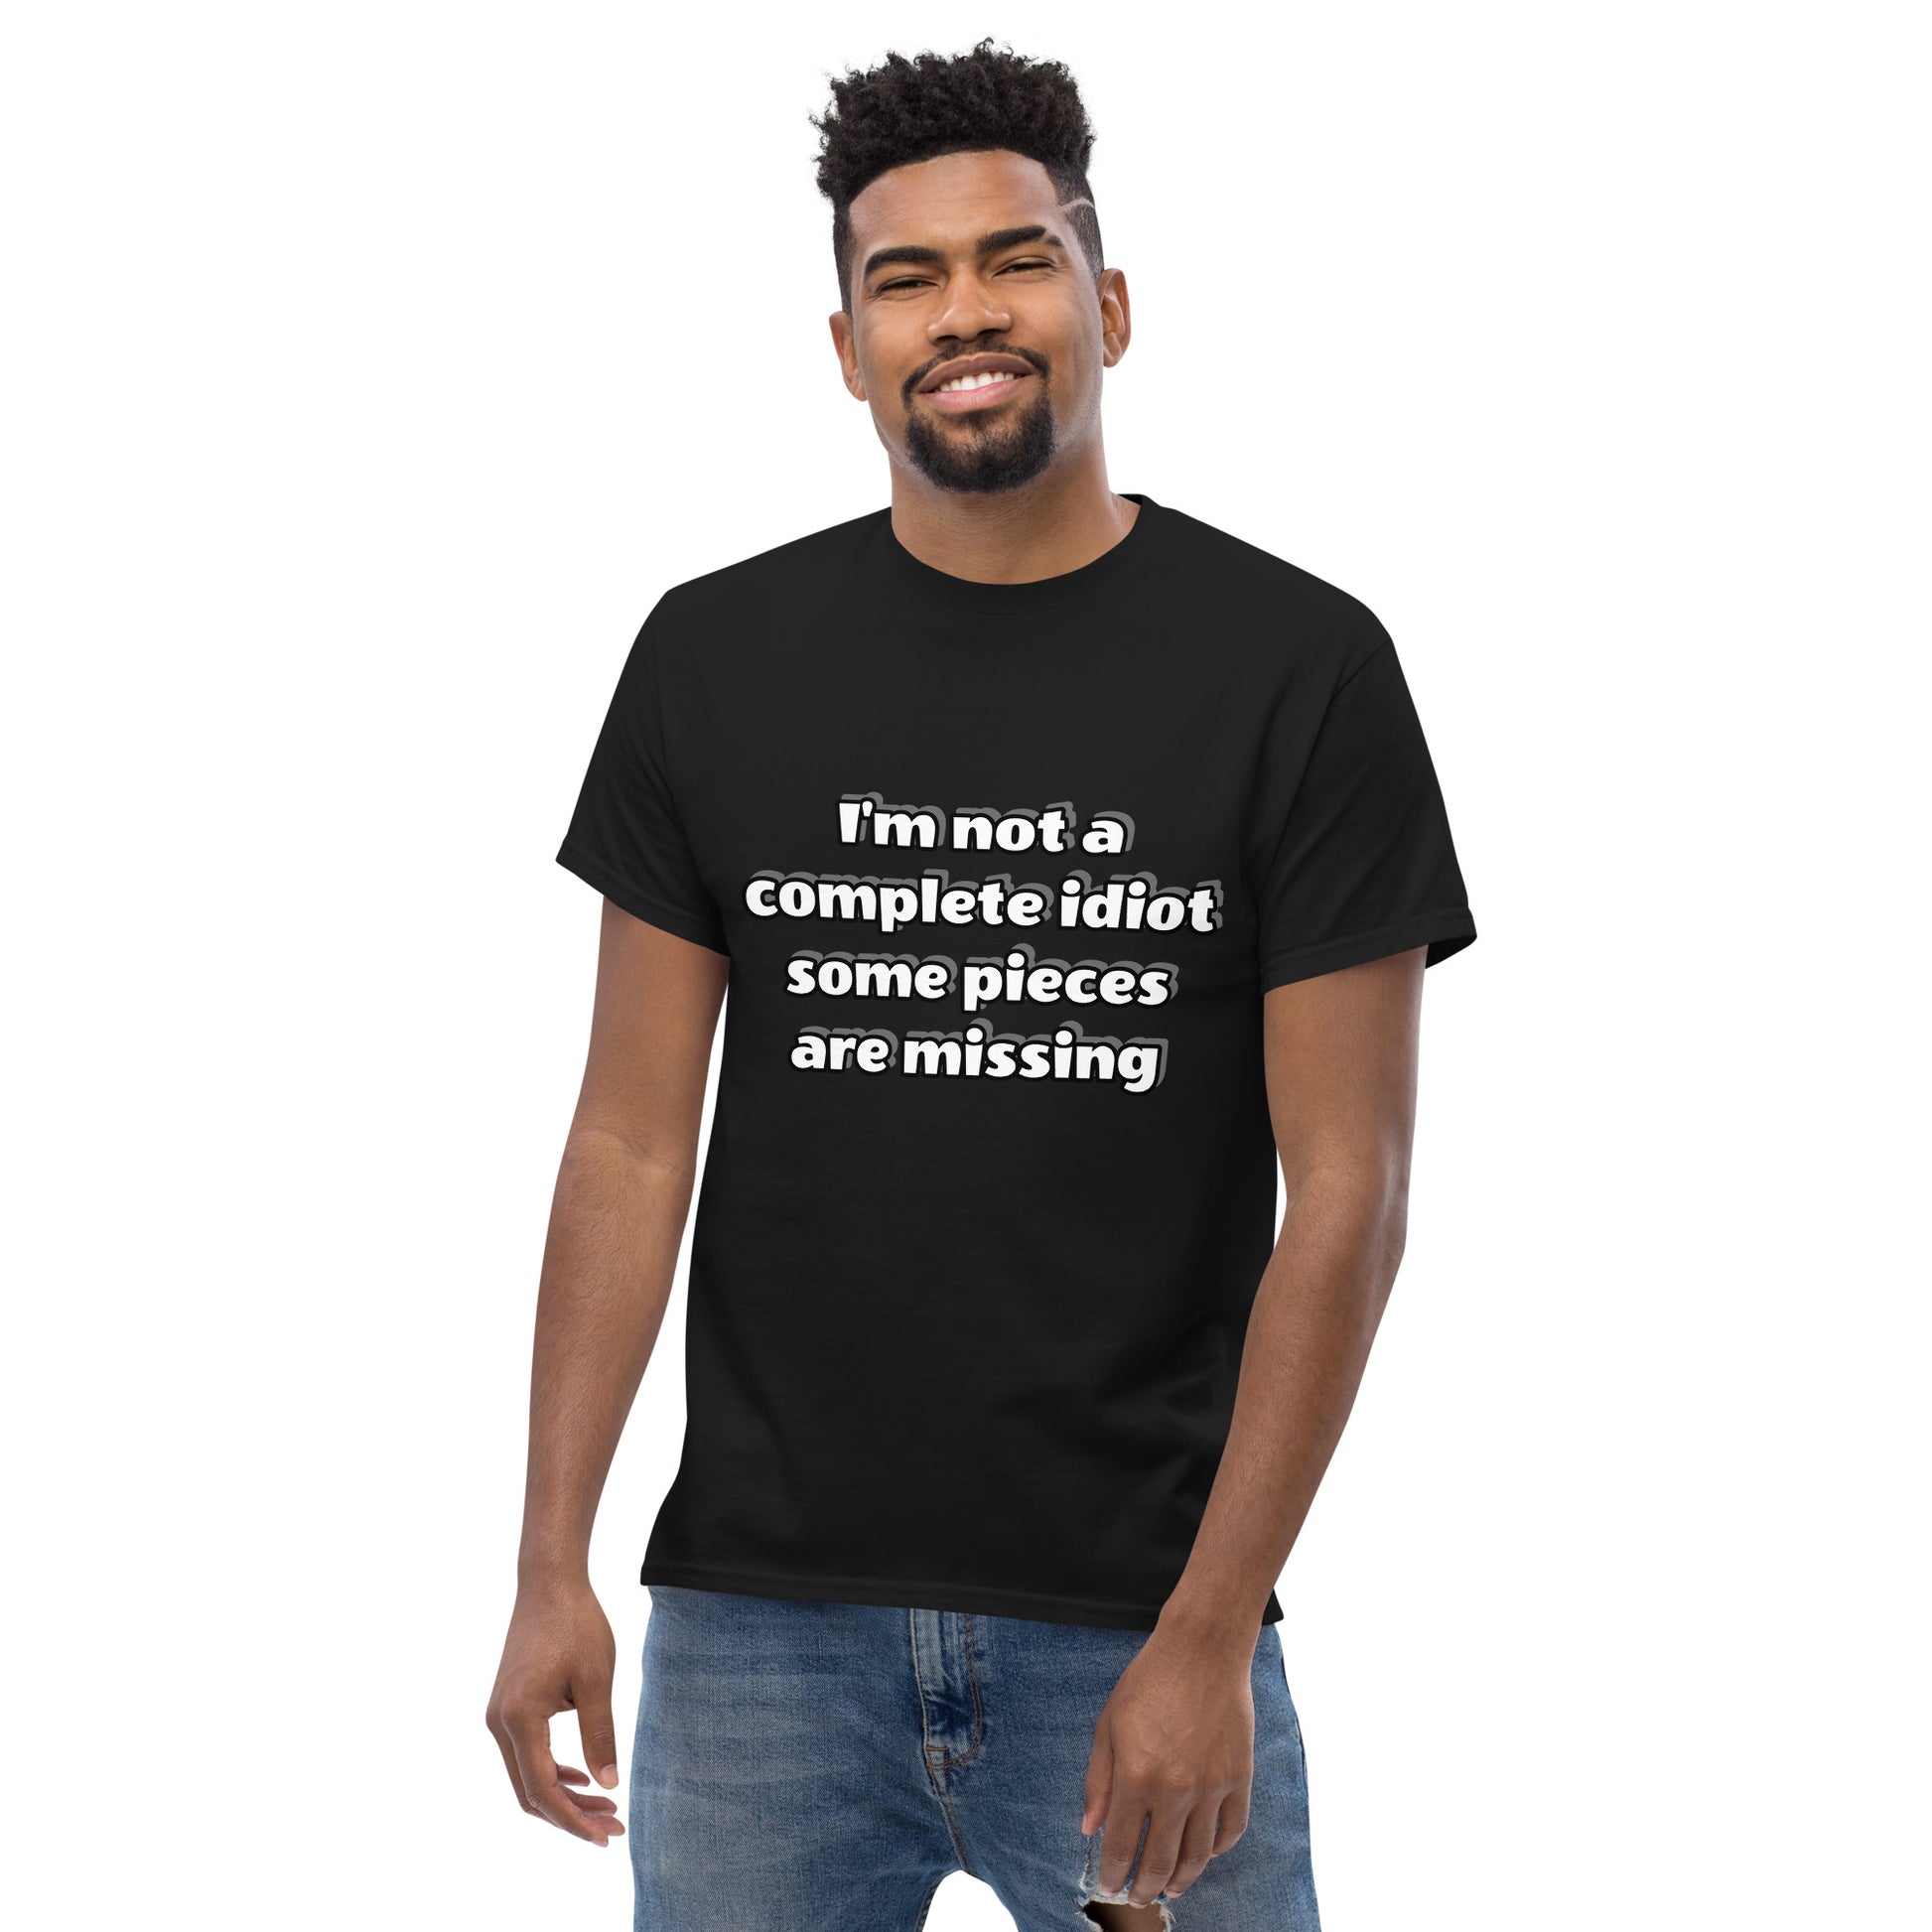 Men with black t-shirt with text “I’m not a complete idiot, some pieces are missing”